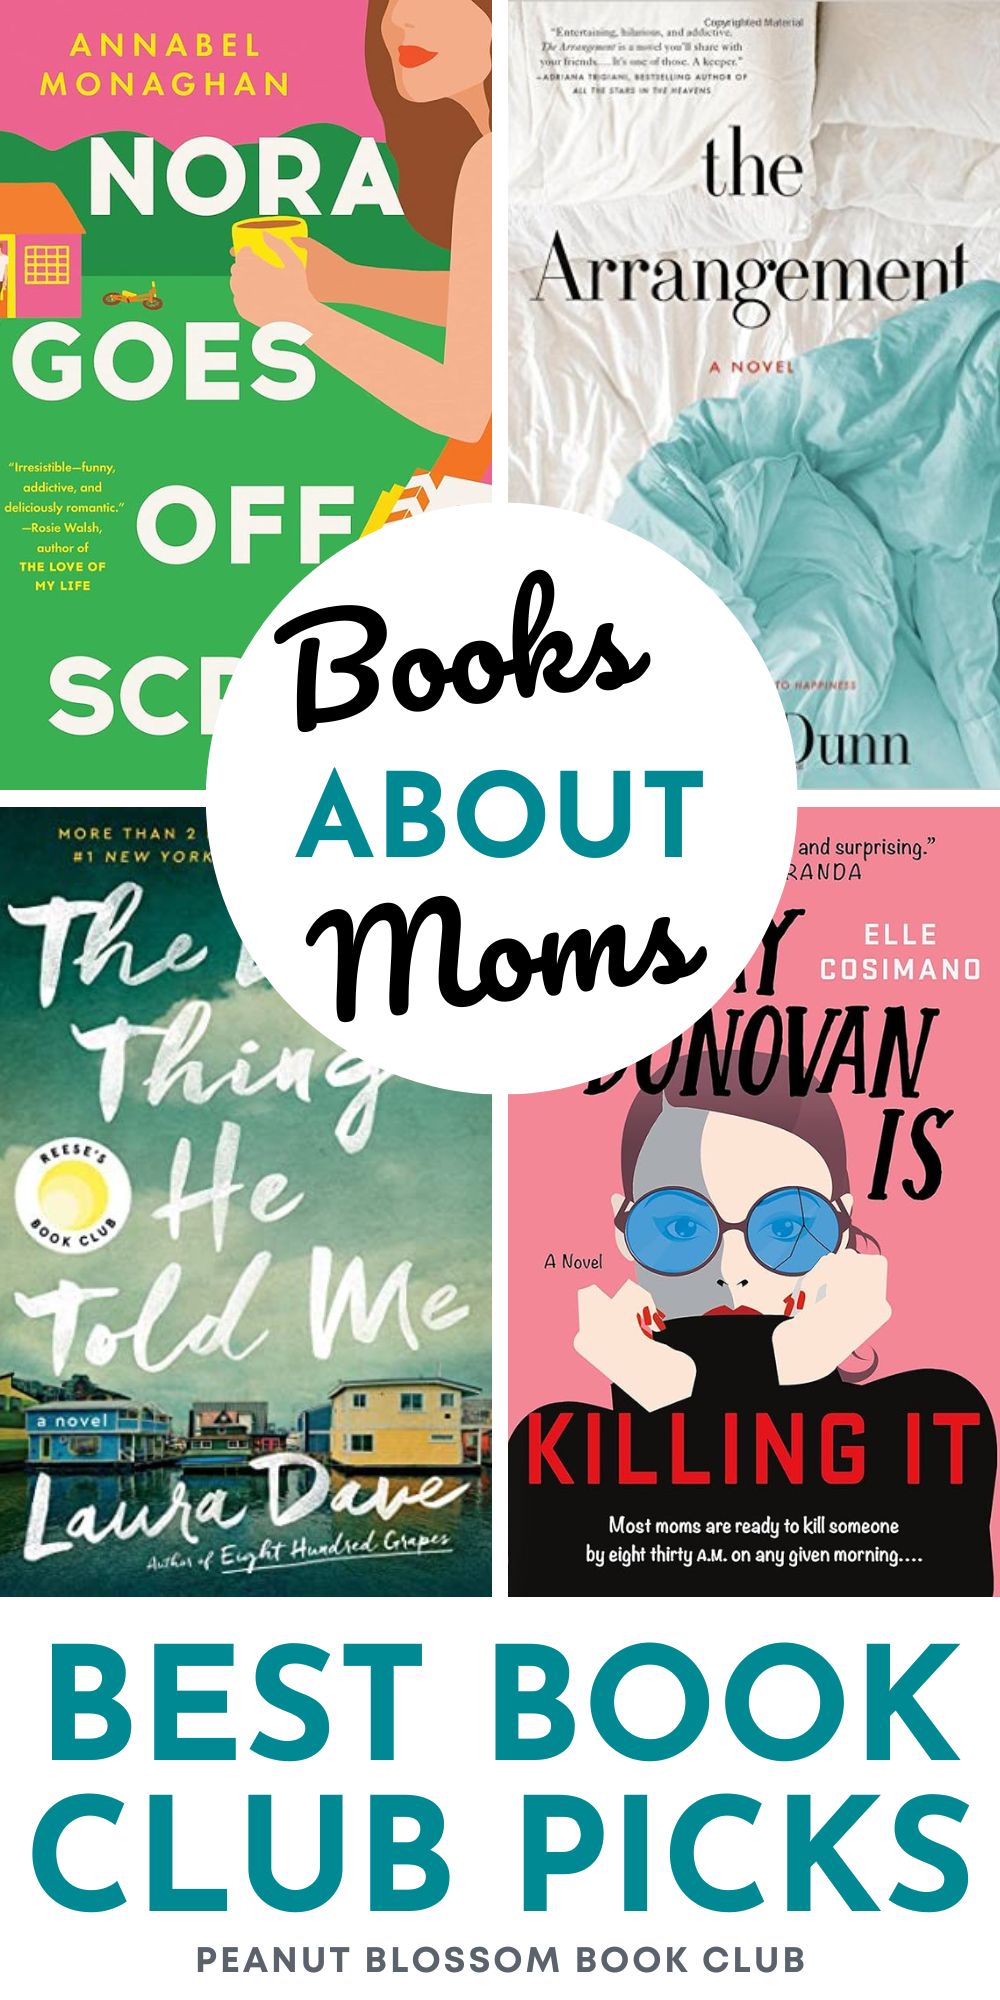 The photo collage shows 4 books about moms.